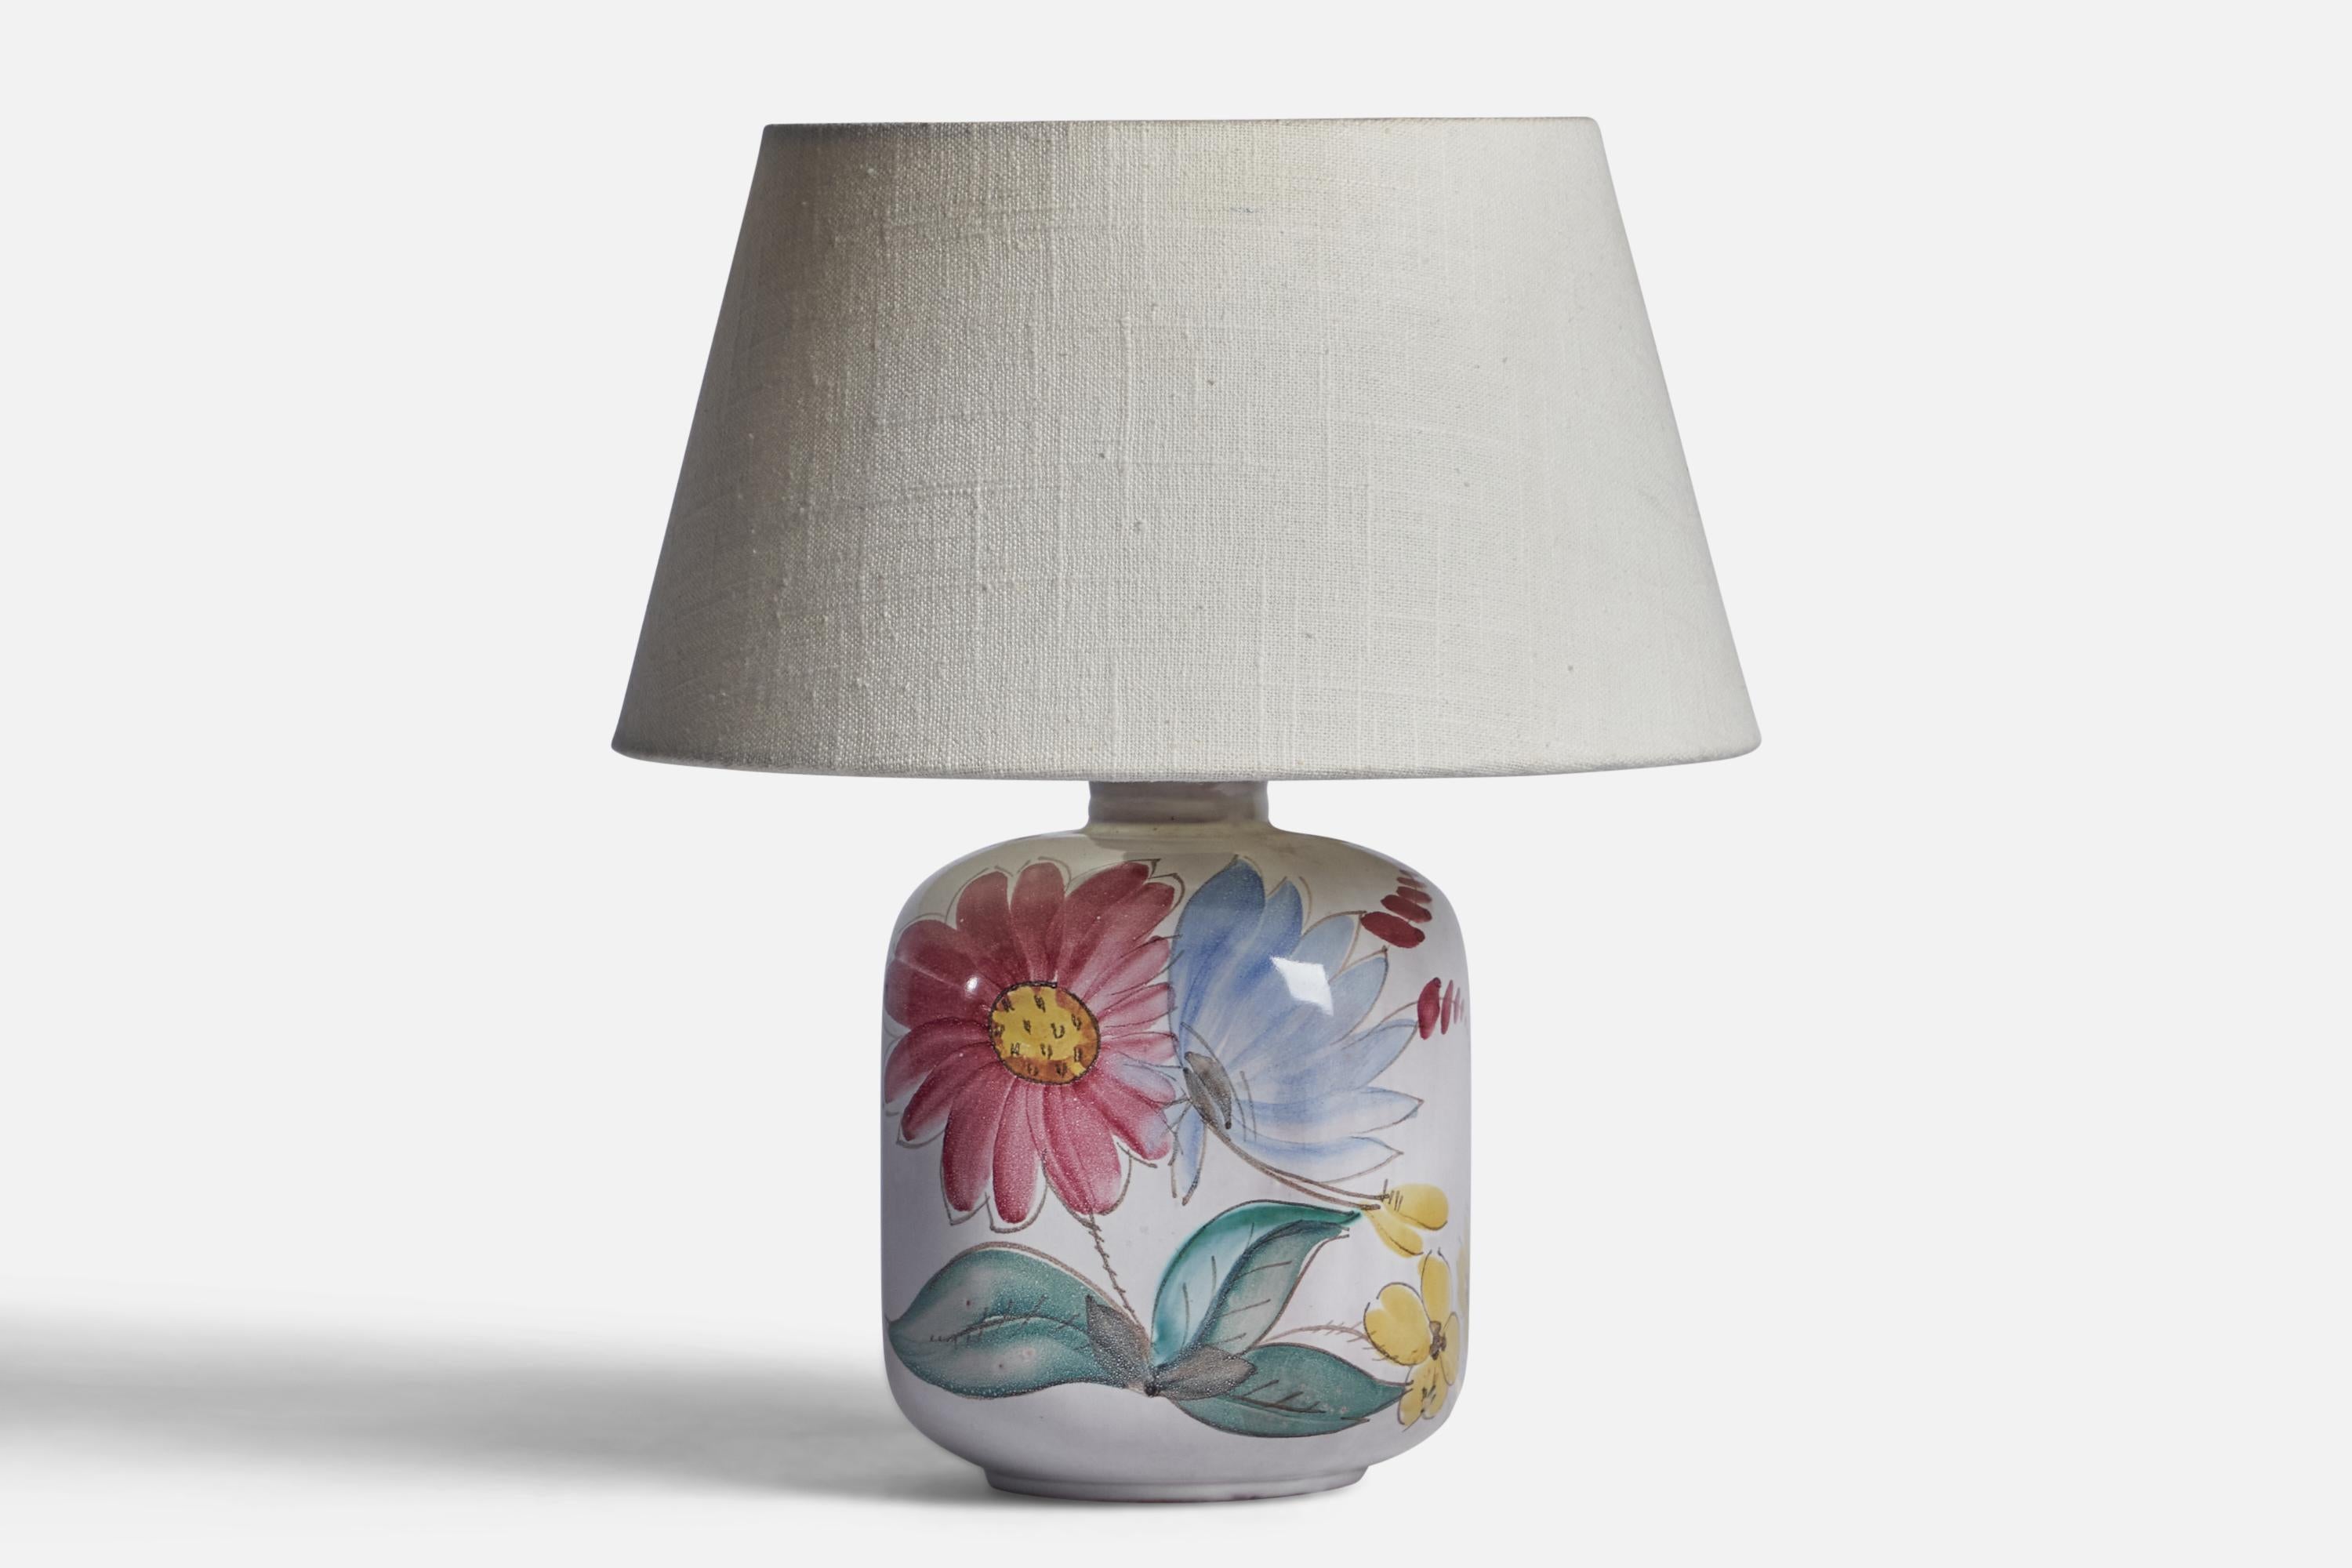 A white-glazed and hand-painted stoneware table lamp produced by Arabia, Finland, c. 1940s.

Dimensions of Lamp (inches): 9.1” H x 5” Diameter
Dimensions of Shade (inches): 7” Top Diameter x 10” Bottom Diameter x 5.5” H 
Dimensions of Lamp with